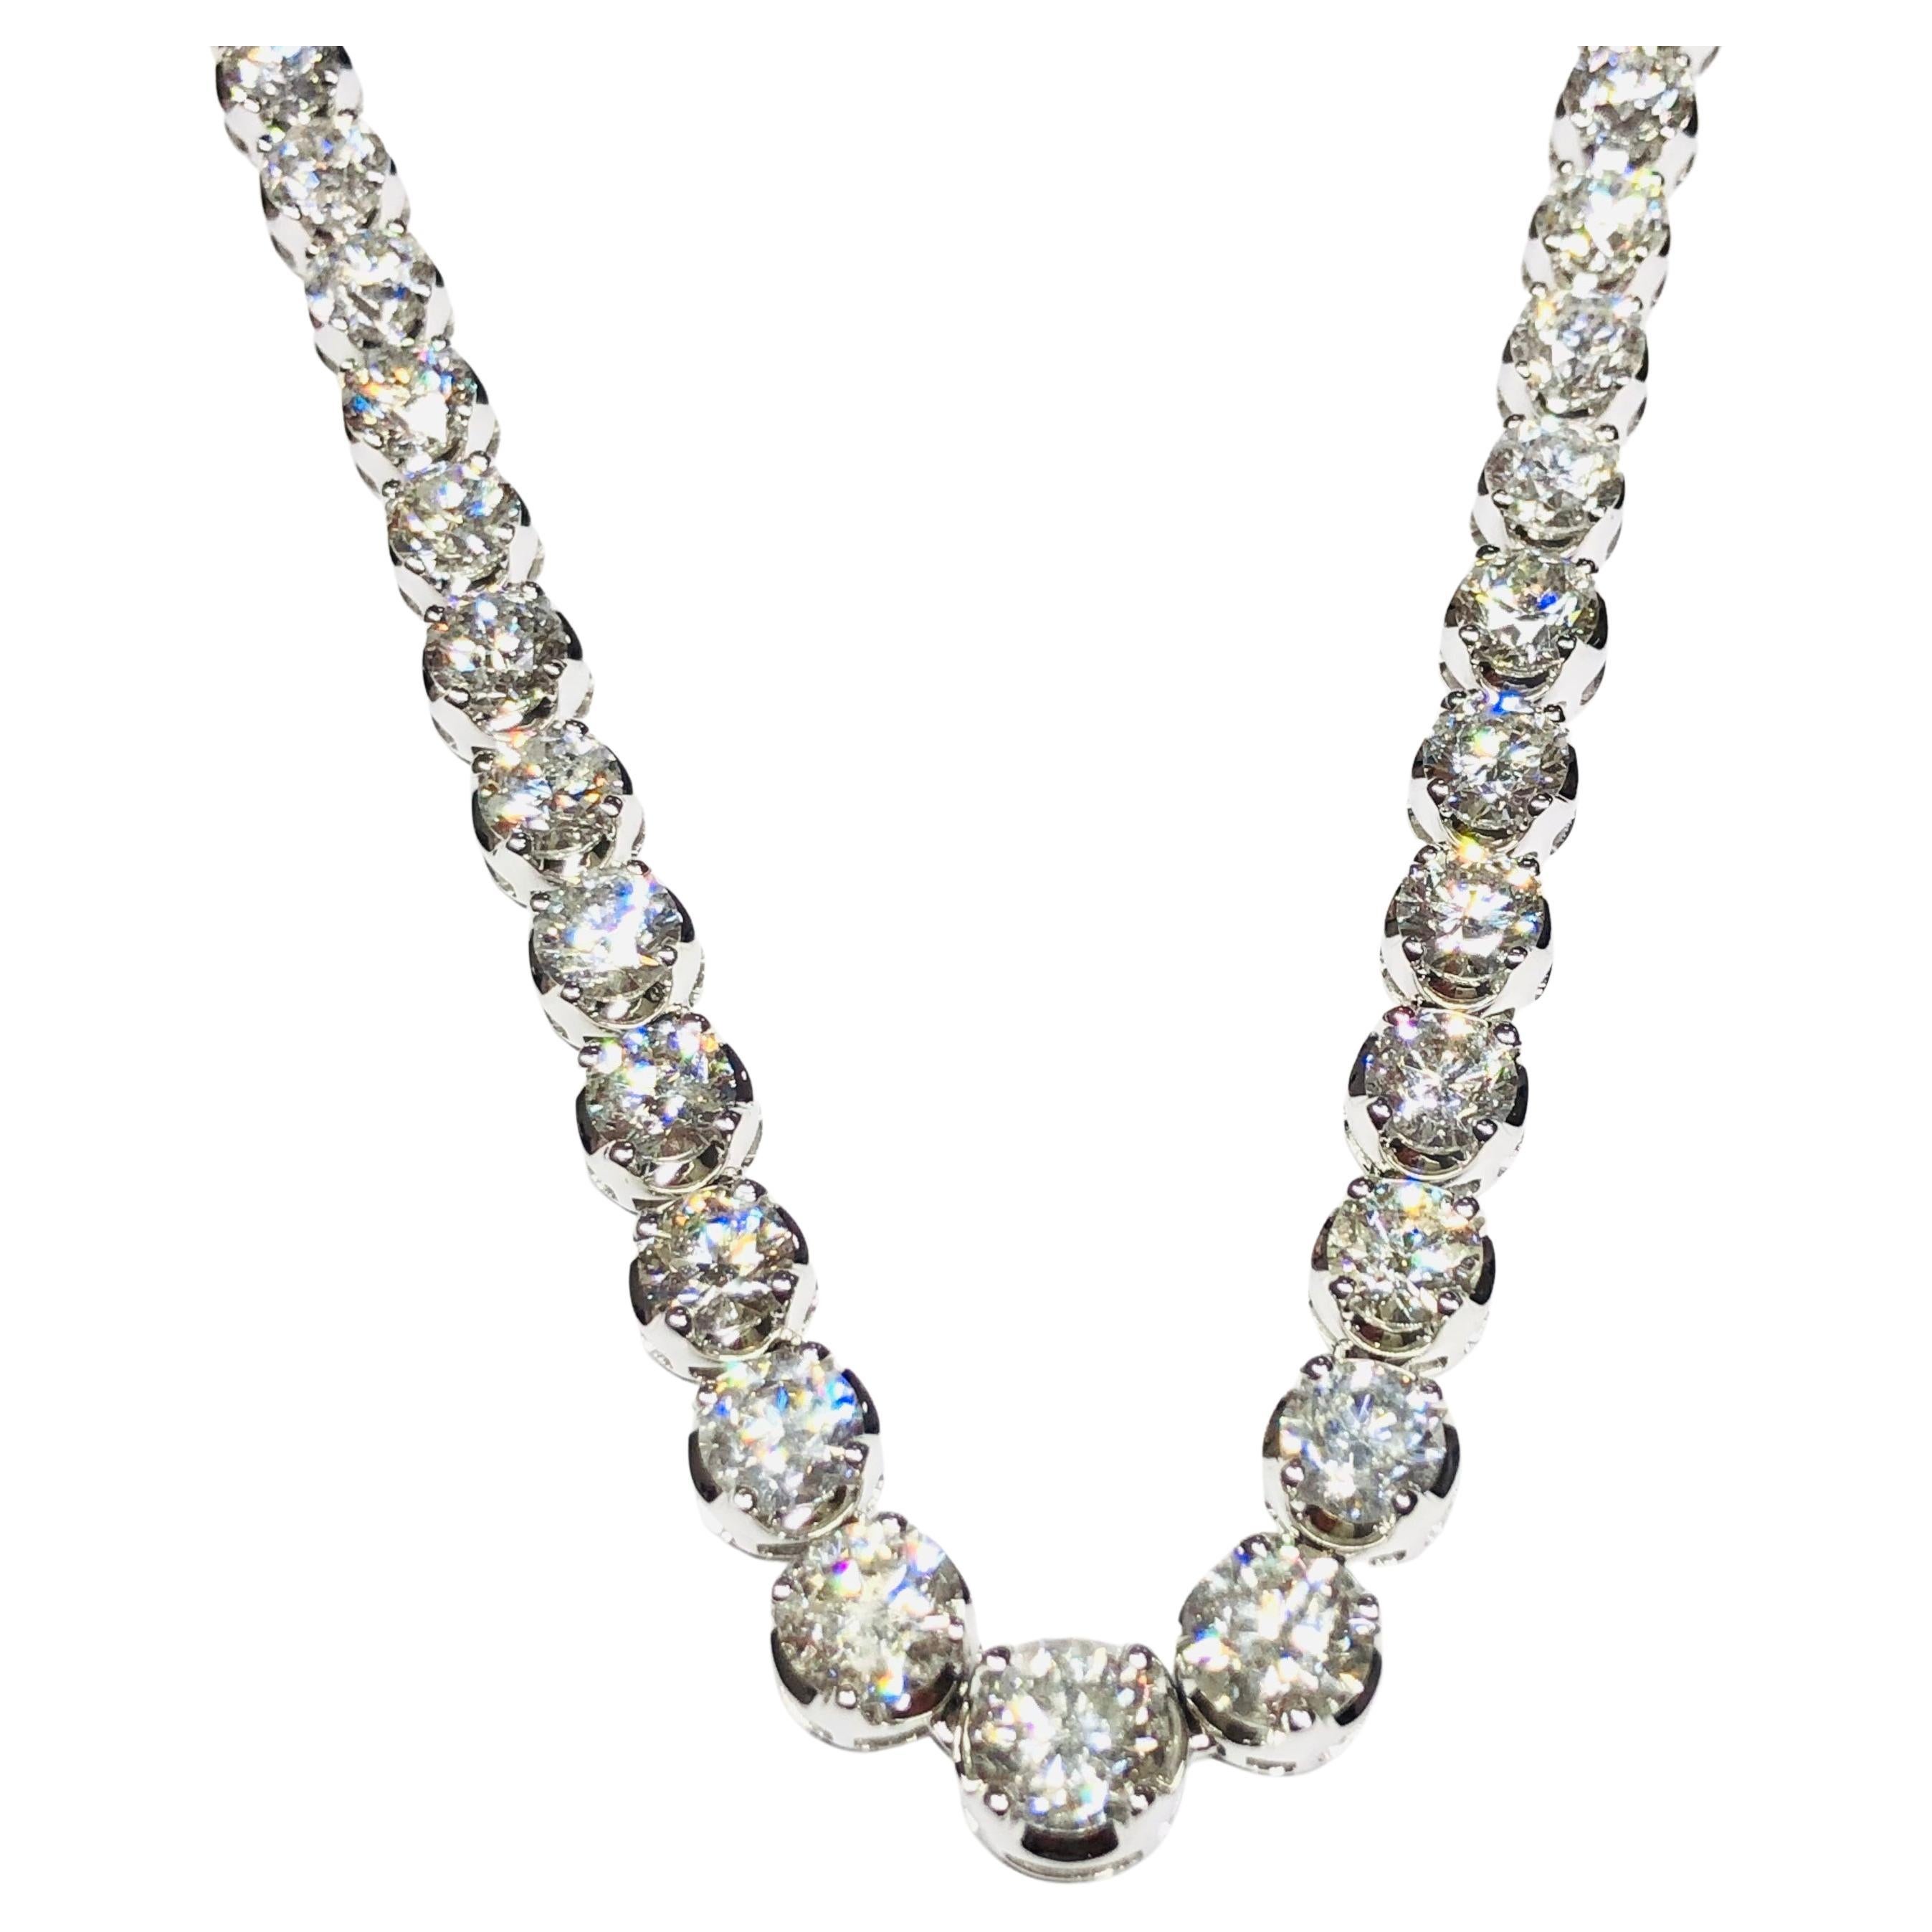 An impressive classic Riviera Tennis Necklace a line that features a substantial total Diamond weight of 32.42 Carats in beautifully graduated Round Brilliant Cut gems with a sparkly white colour H clarity SI eye clean, each stone has a four-claw